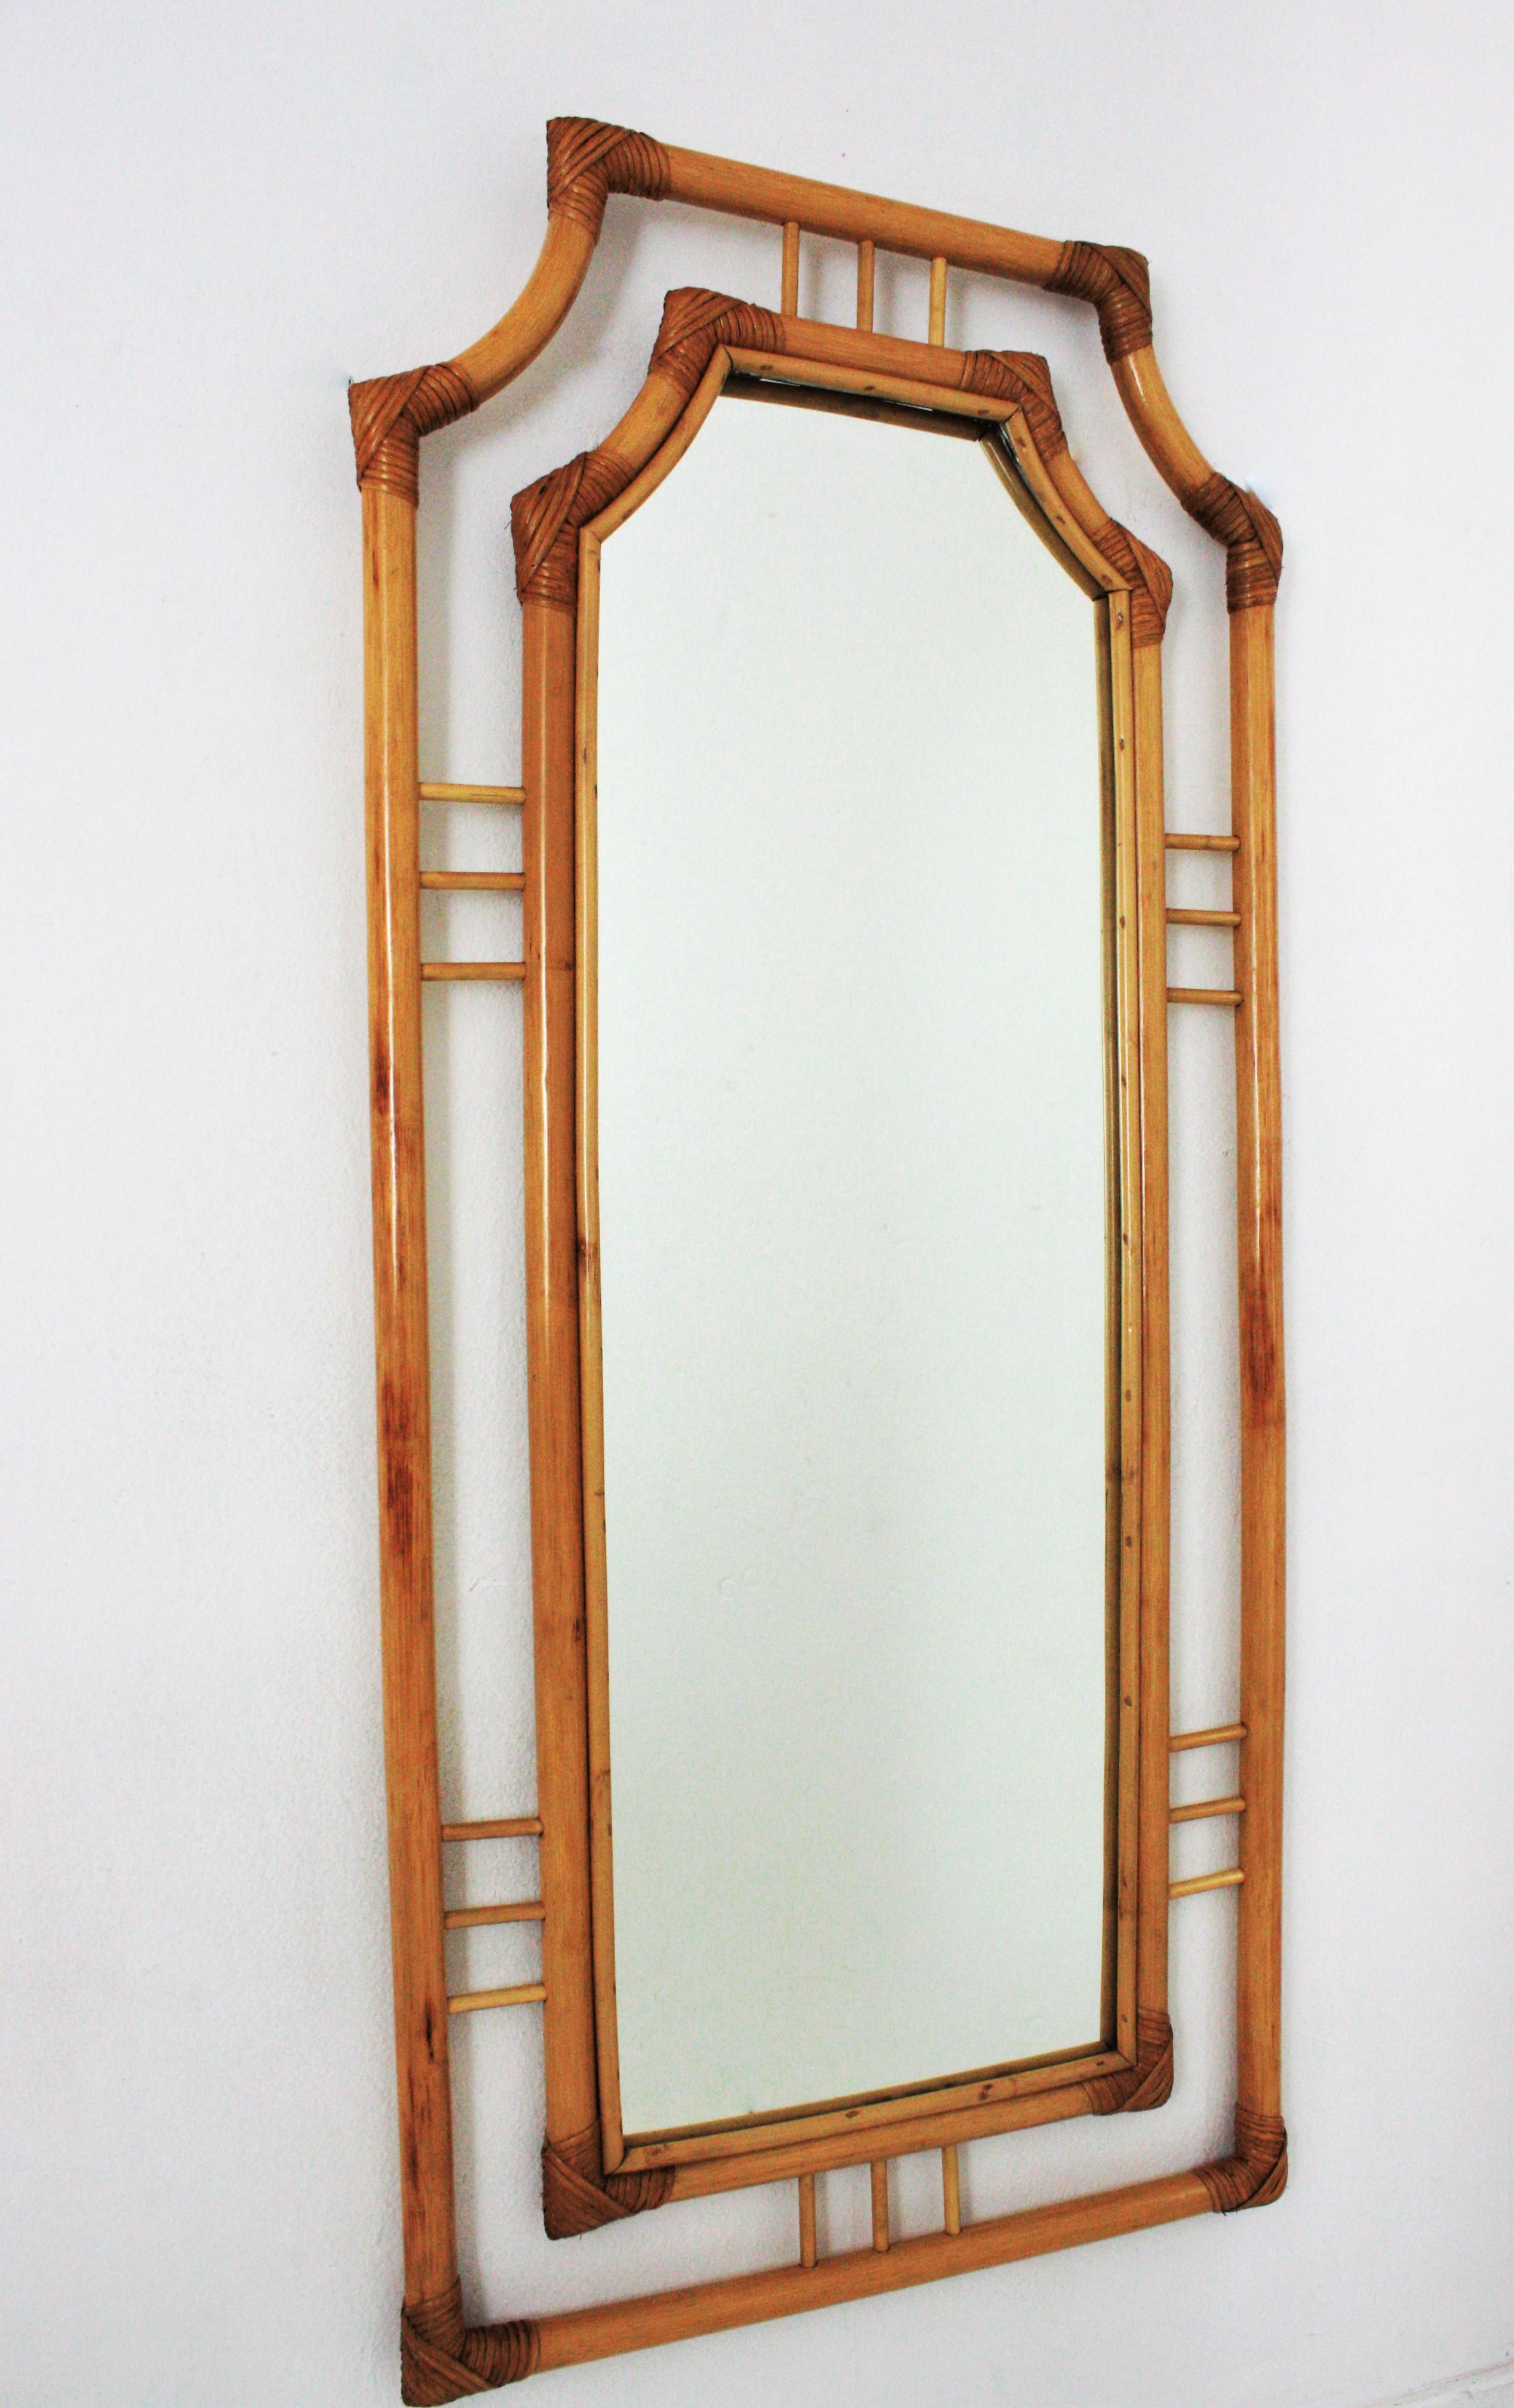 Mid-Century Modern bamboo and rattan pagoda style rectangular mirror with oriental accents, Spain, 1960s.
This tall wall mirror will be eye-catching in a dressing room, bedroom or bathroom. Place it in a beach house, countryside house or urban